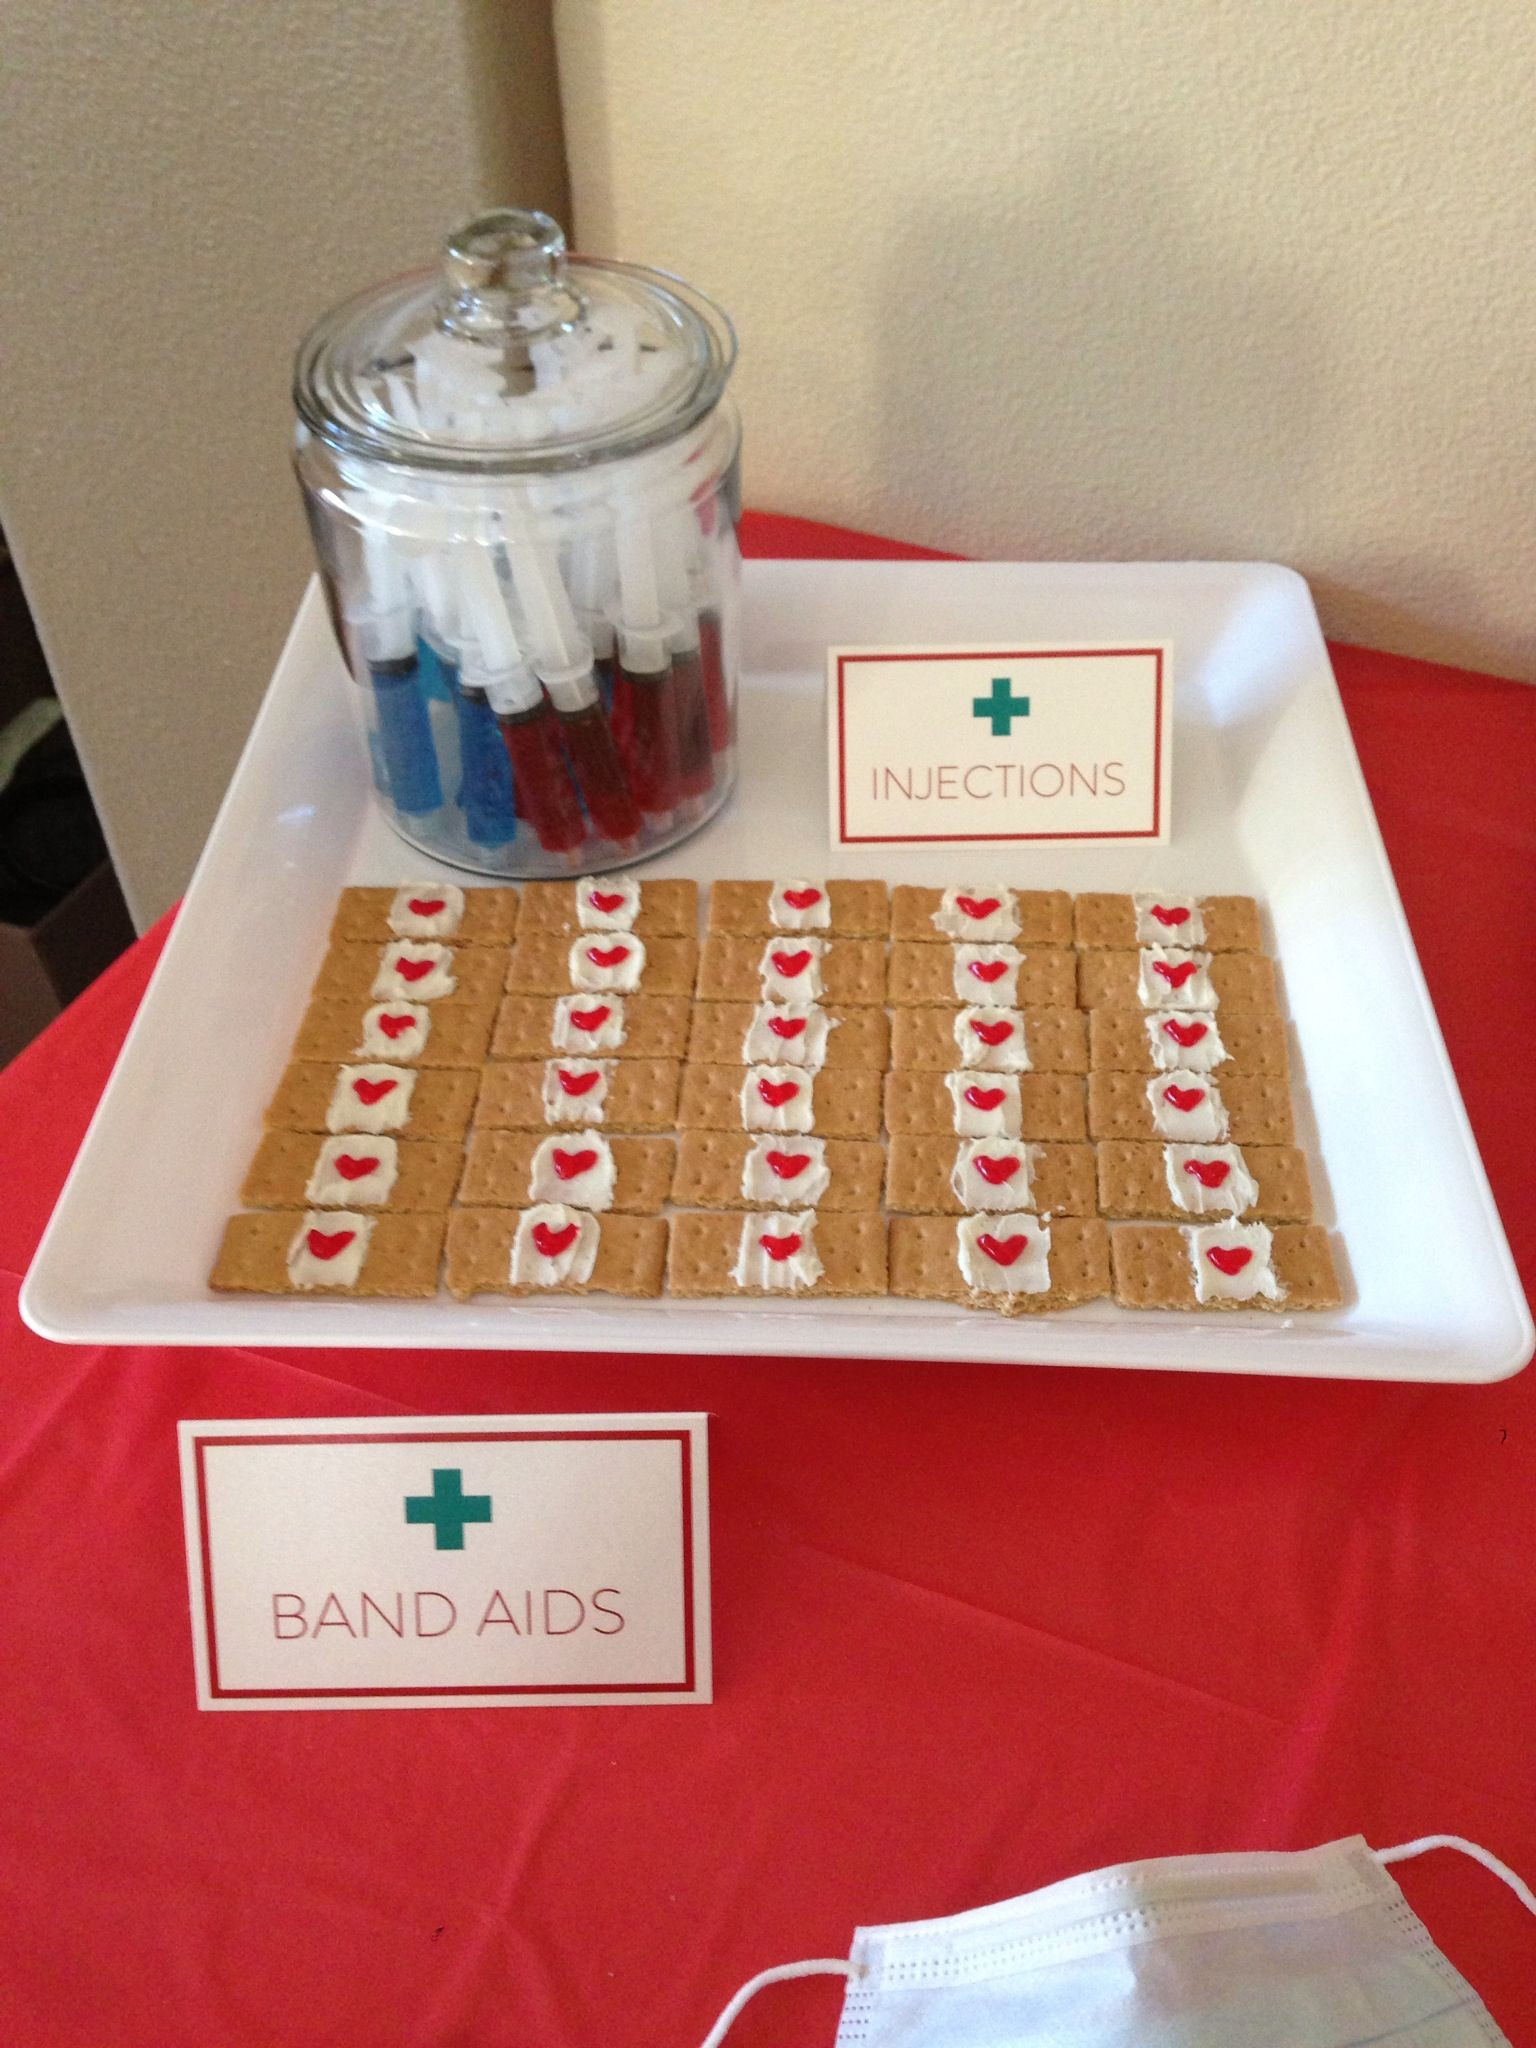 Graduation Party Ideas For Nurses
 Jello "Injections" and Graham Cracker "Bandaids" at my